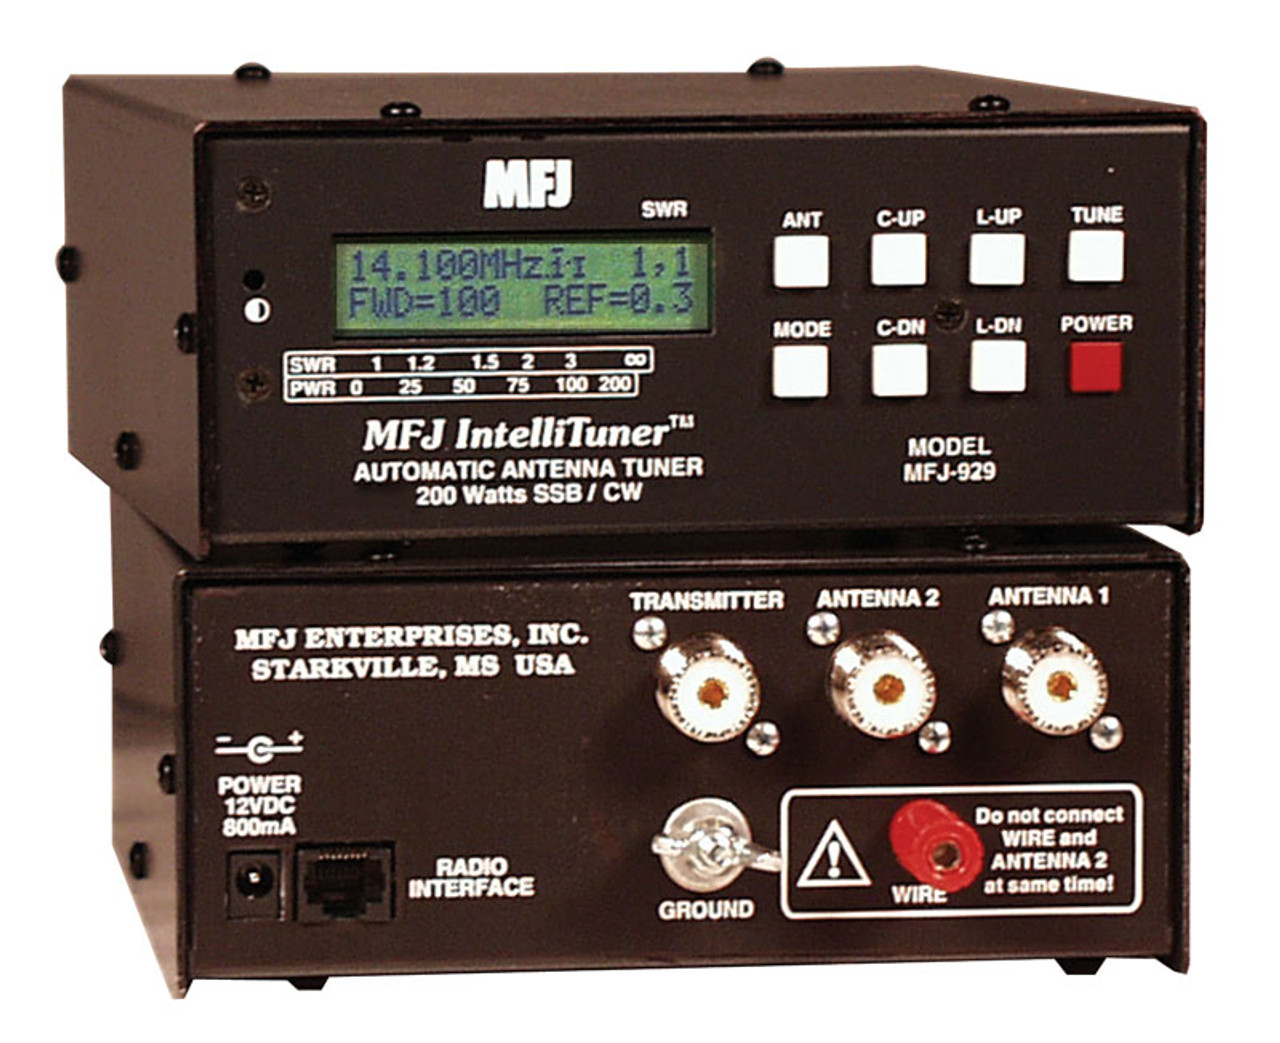 MFJ-929 Antenna Tuner, Compact, Desktop, Automatic, 200 watts, 160-10 meters, Tuner Bypass Switch hq nude image